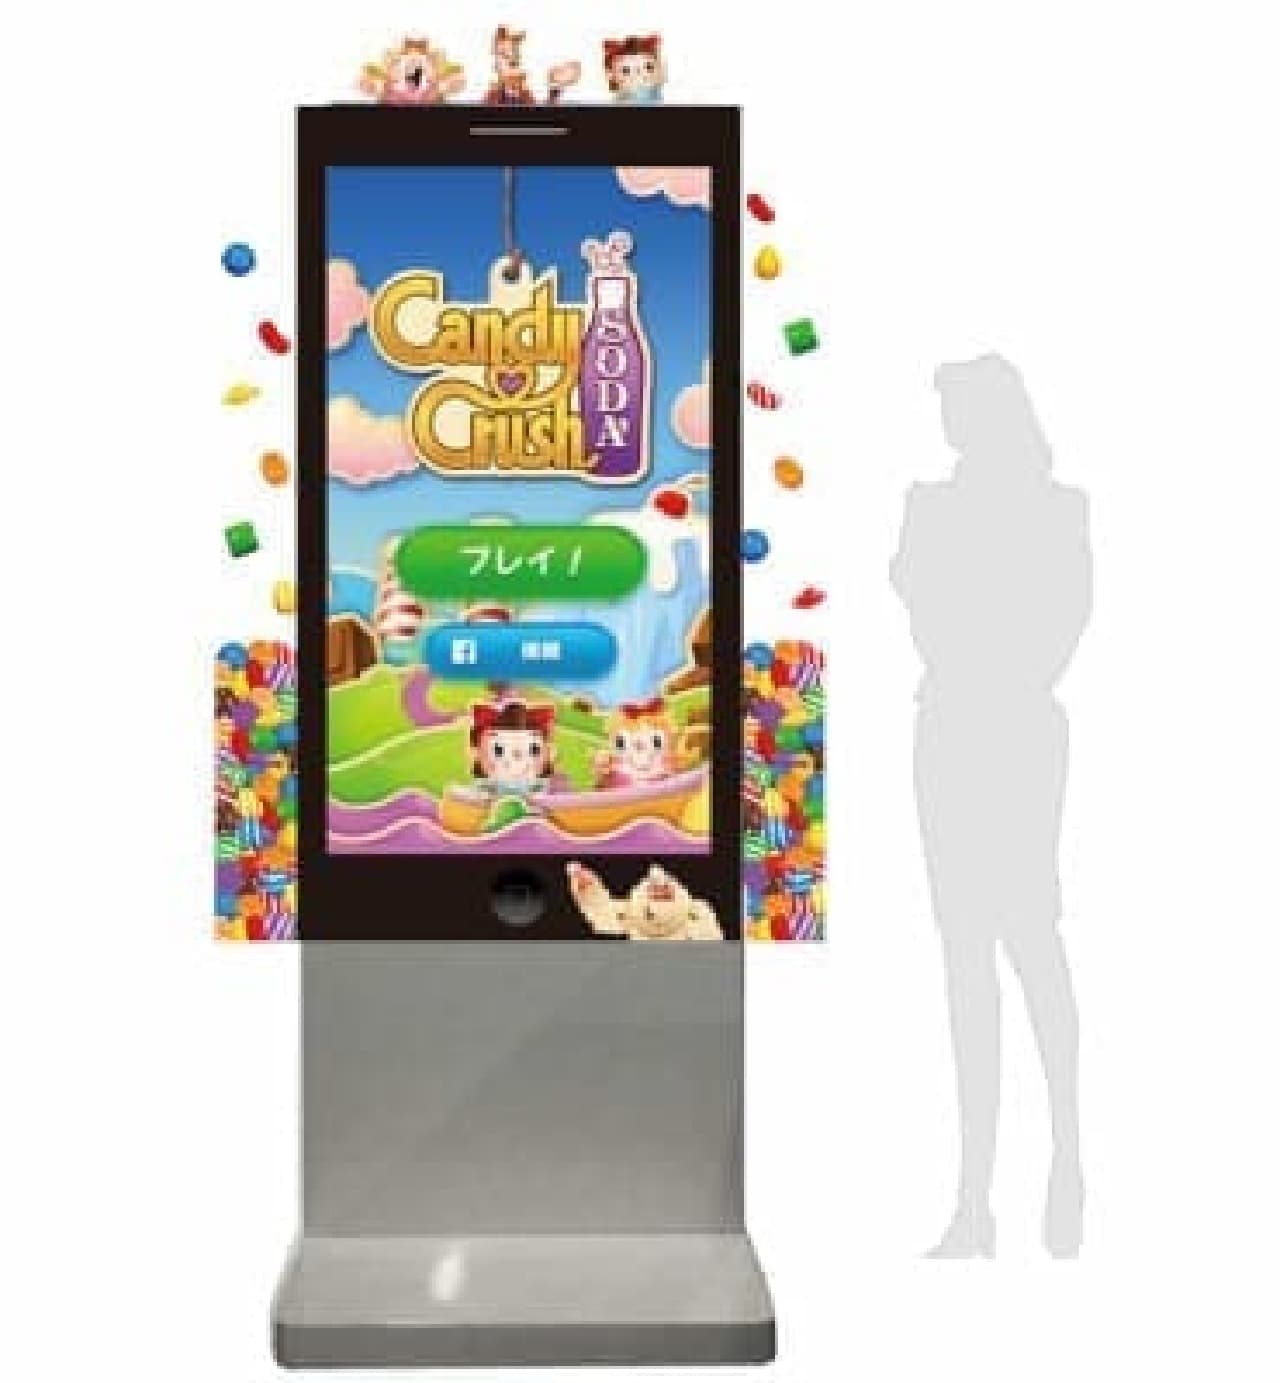 "Dekasumaho" that allows you to play games on a large screen